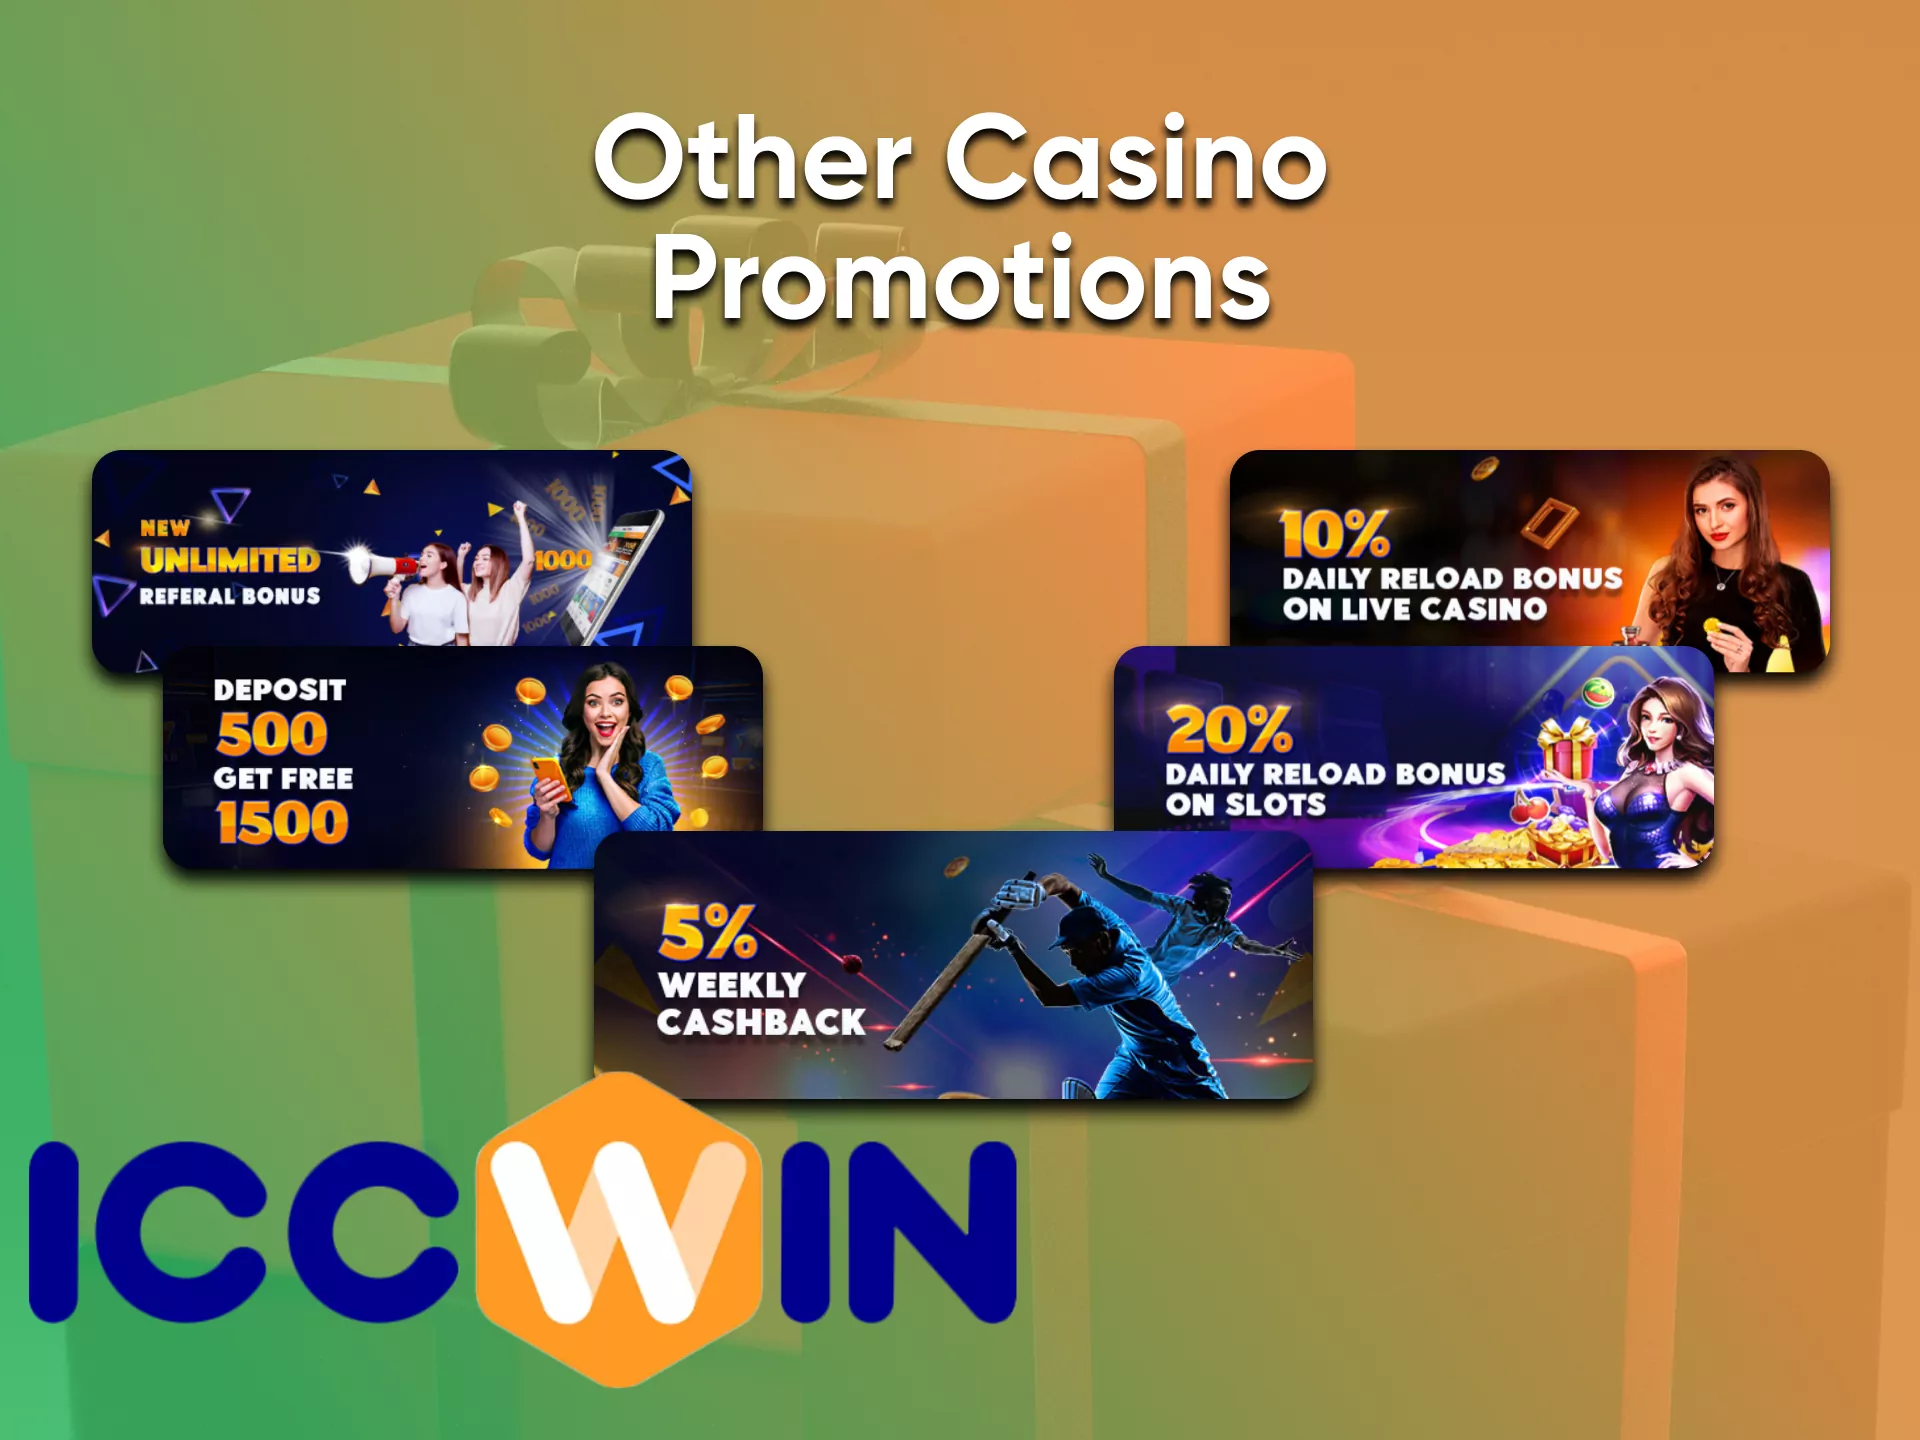 Play at the casino for extra bonuses from ICCWin.